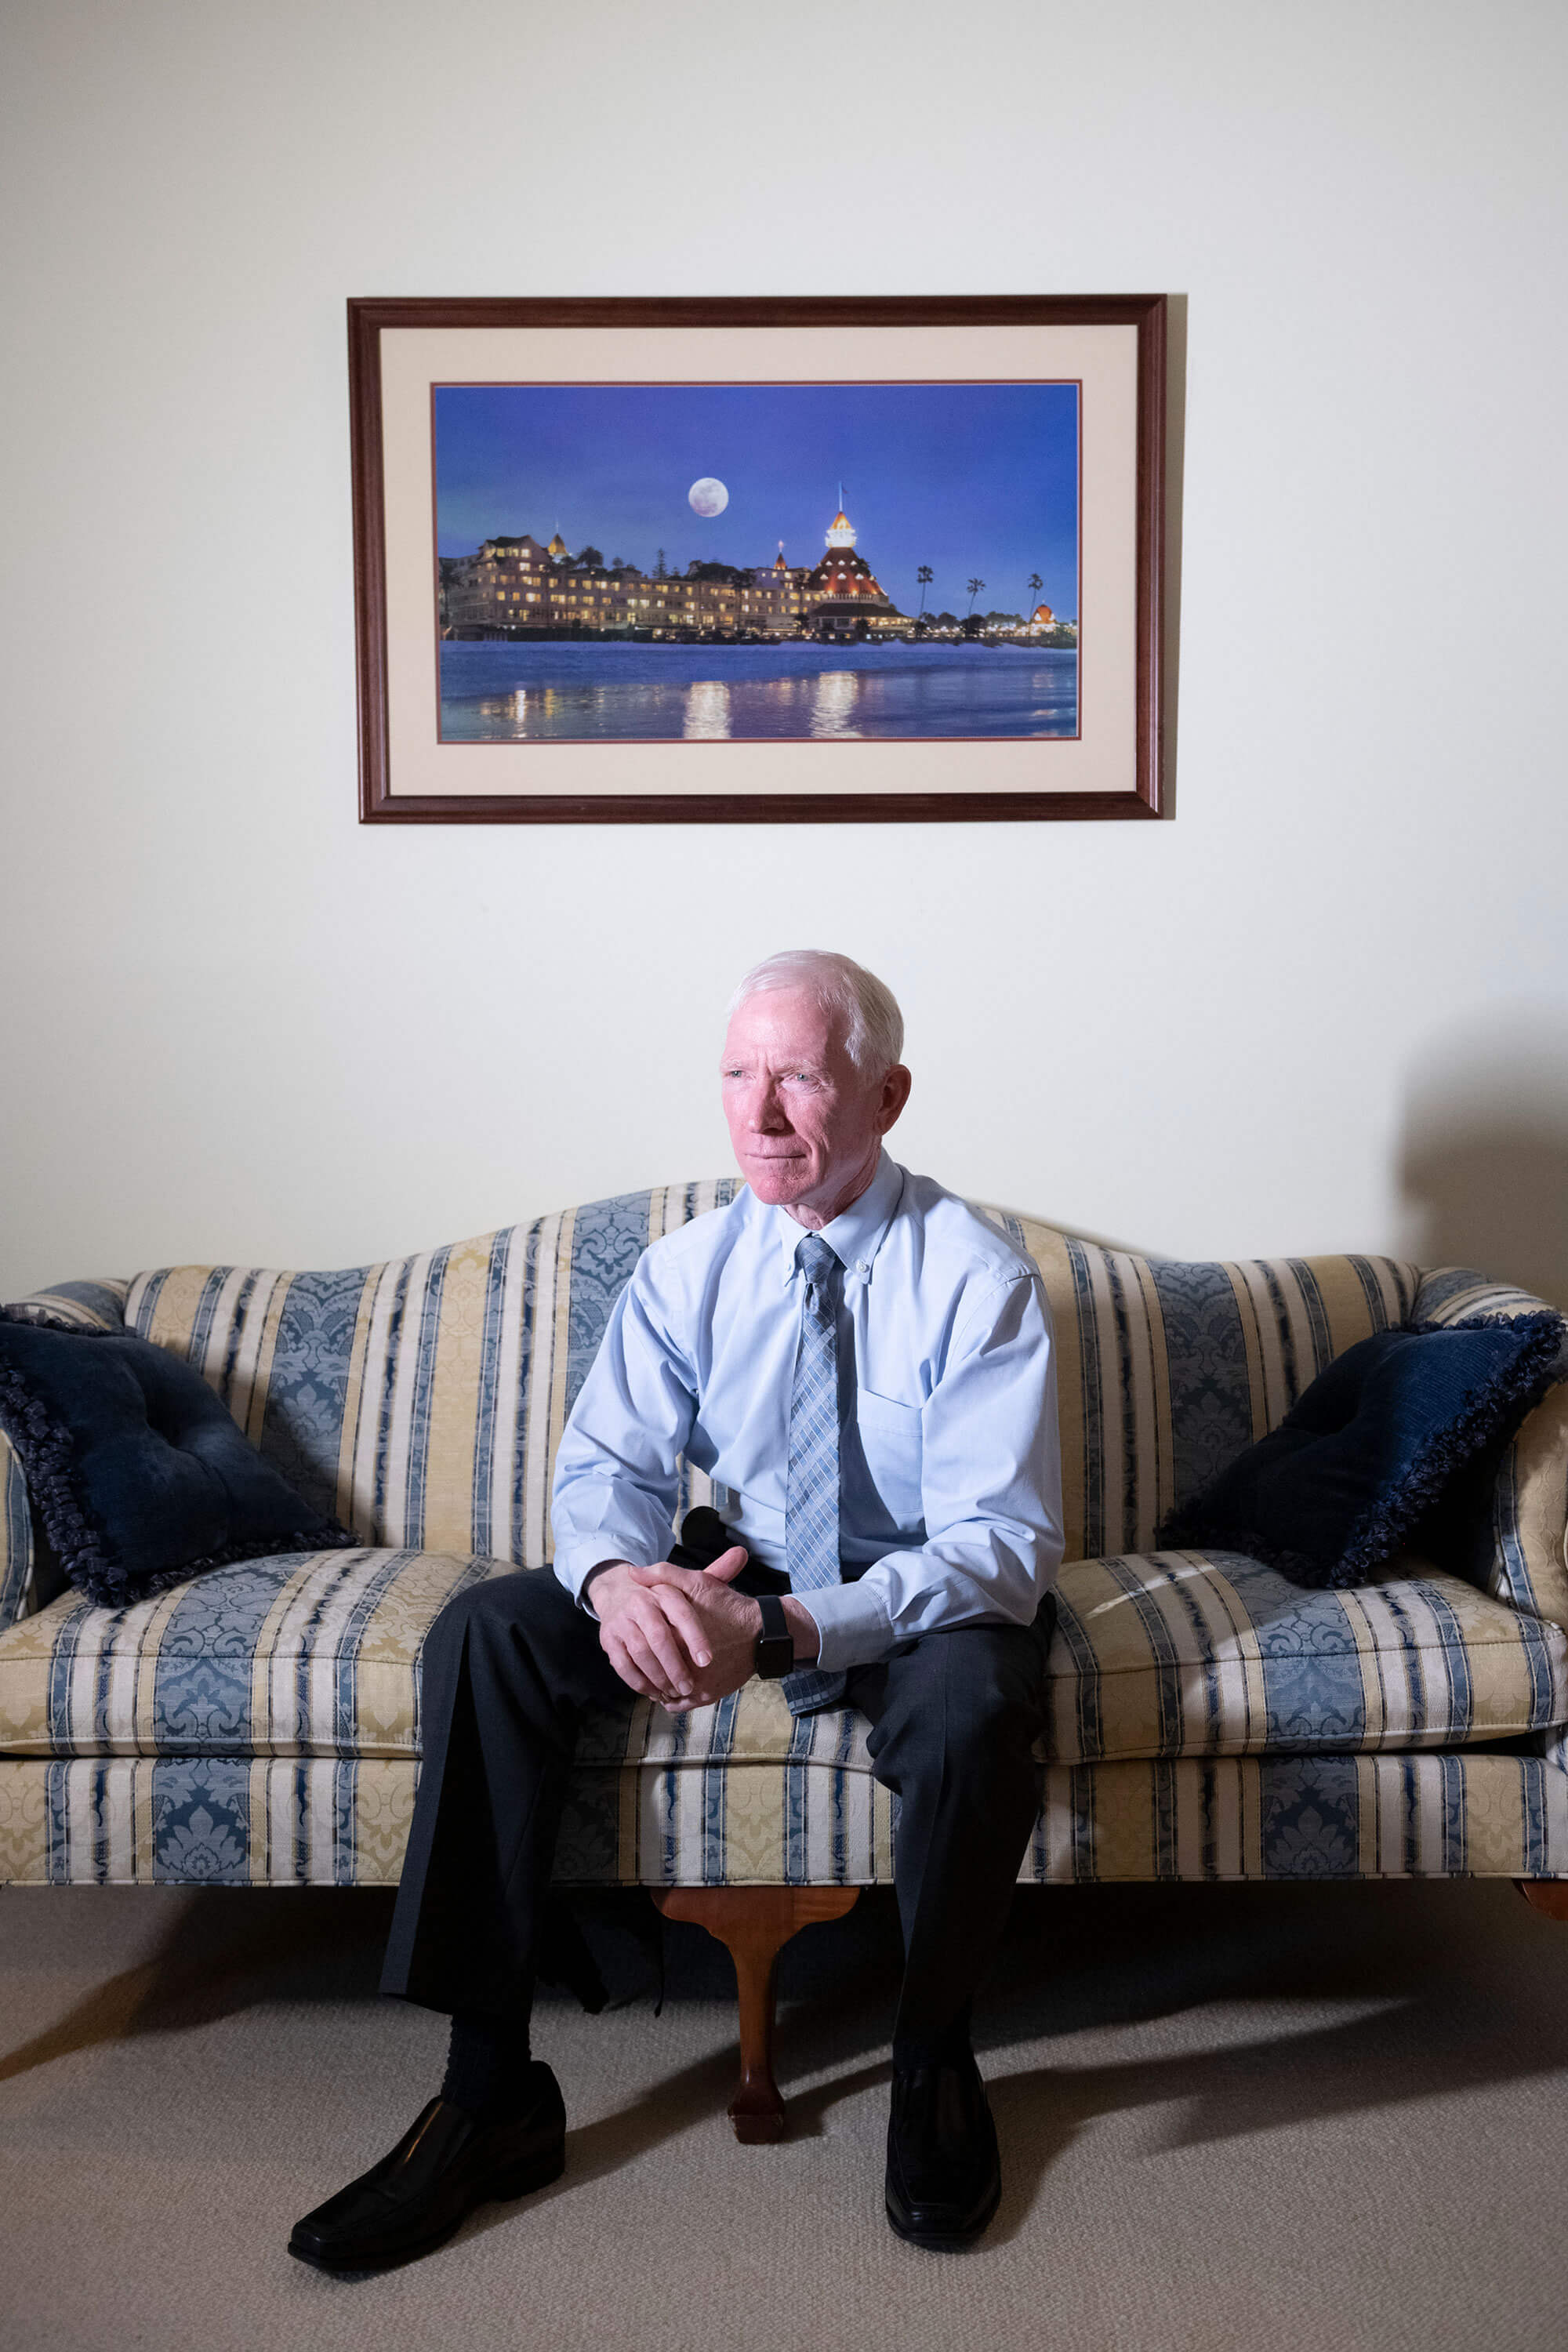 Attorney Harry Deitzler poses for a portrait in his office at Hill, Peterson, Carper, Bee and Deitzler, PLLC, in Charleston, West Virginia, on Nov. 27, 2019. Deitzler was involved in settling the C8 groundwater contamination suit against DuPont in Parkersburg, West Virginia. (Photo by Lexi Browning/100 Days in Appalachia)